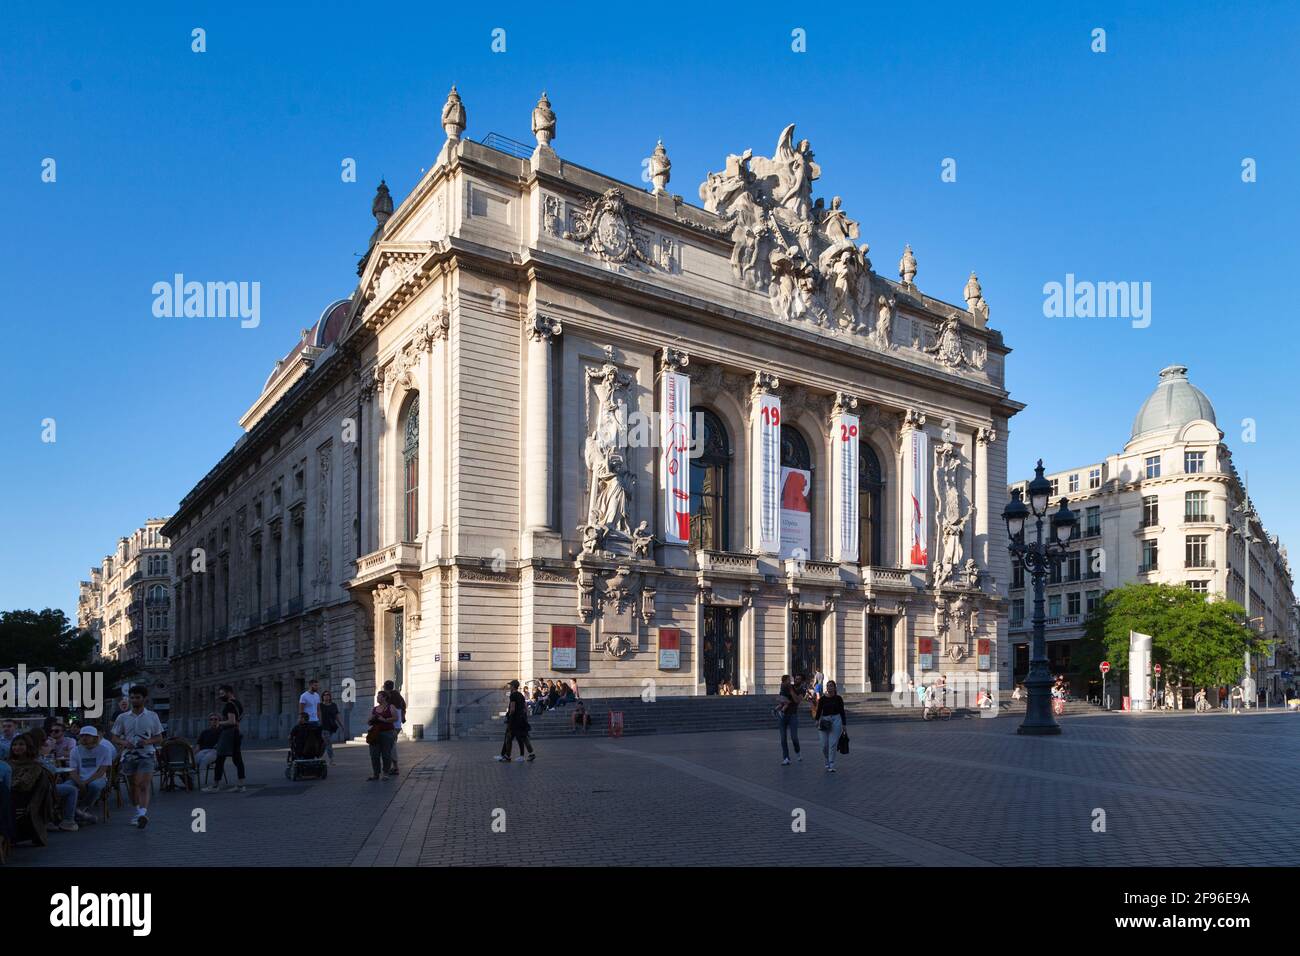 Lille, France - June 22 2020: The Opéra de Lille is a neo-classical opera house, built from 1907 to 1913 on the place du Théâtre next to Chamber of Co Stock Photo